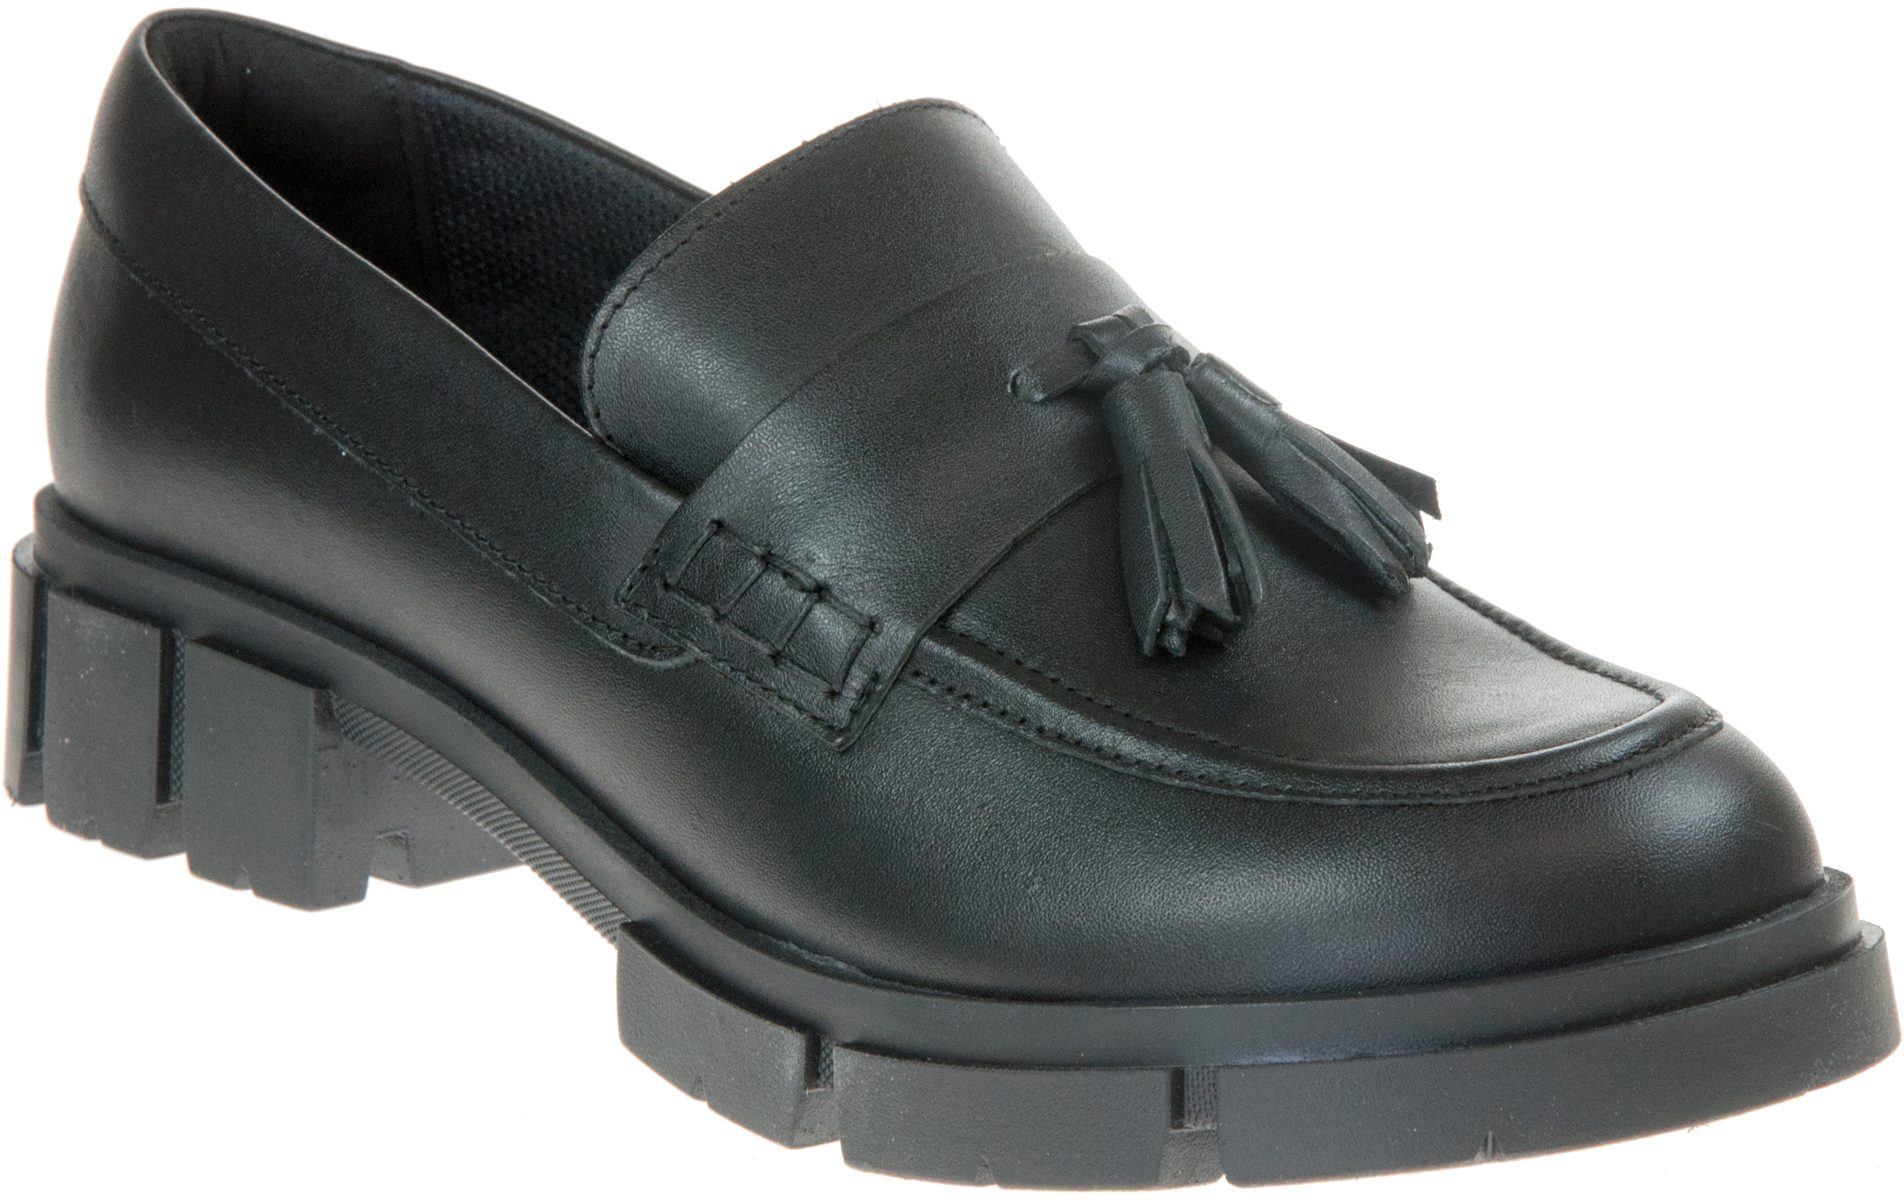 Clarks Teala Loafer Black Leather 26168999 - Everyday Shoes - Humphries ...